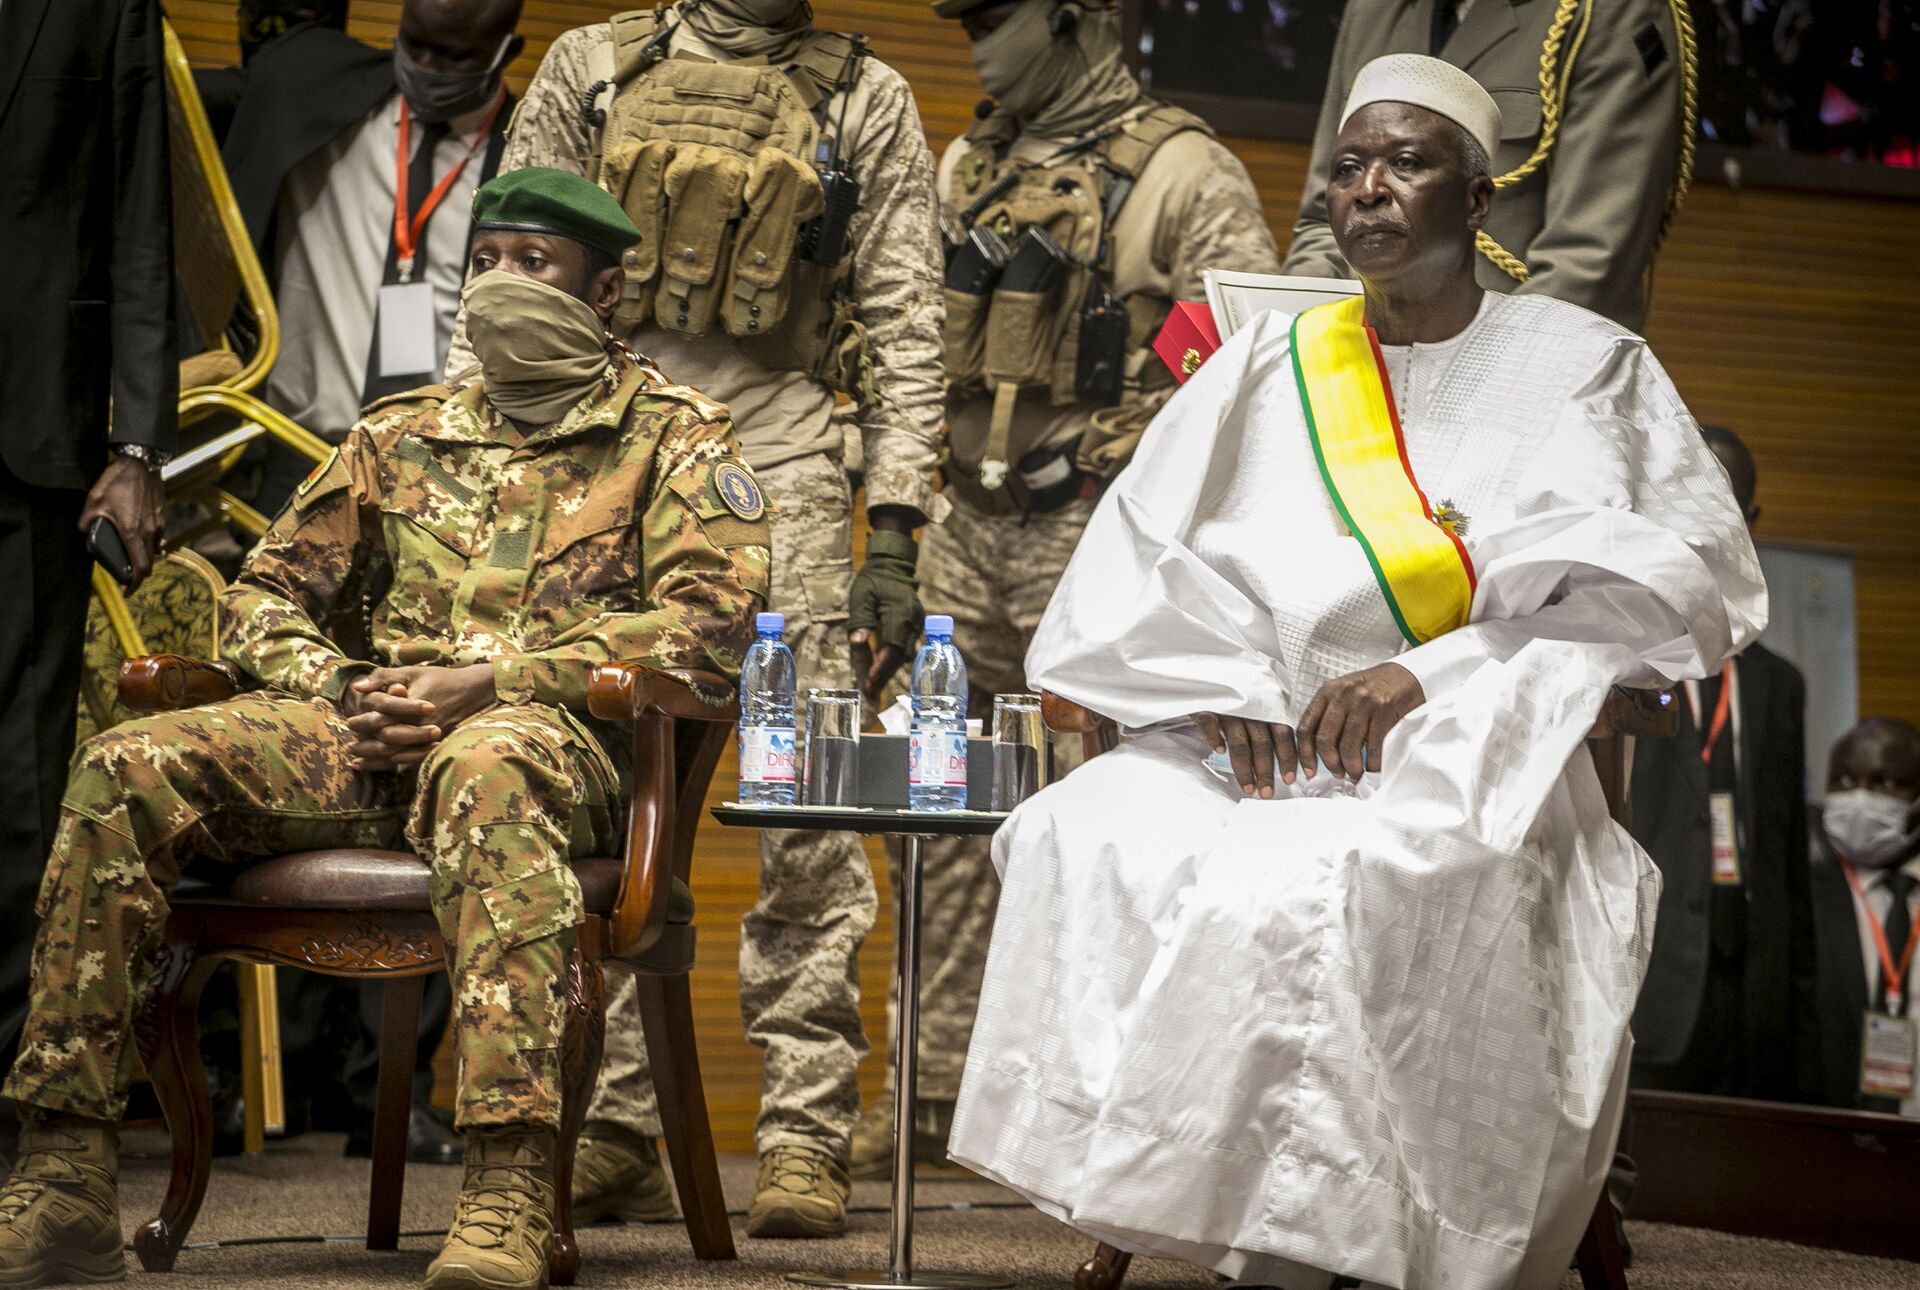 Mali’s Junta Leader Goita Says 2022 Elections to ‘Proceed Normally’ After Second Coup - Sputnik International, 1920, 25.05.2021